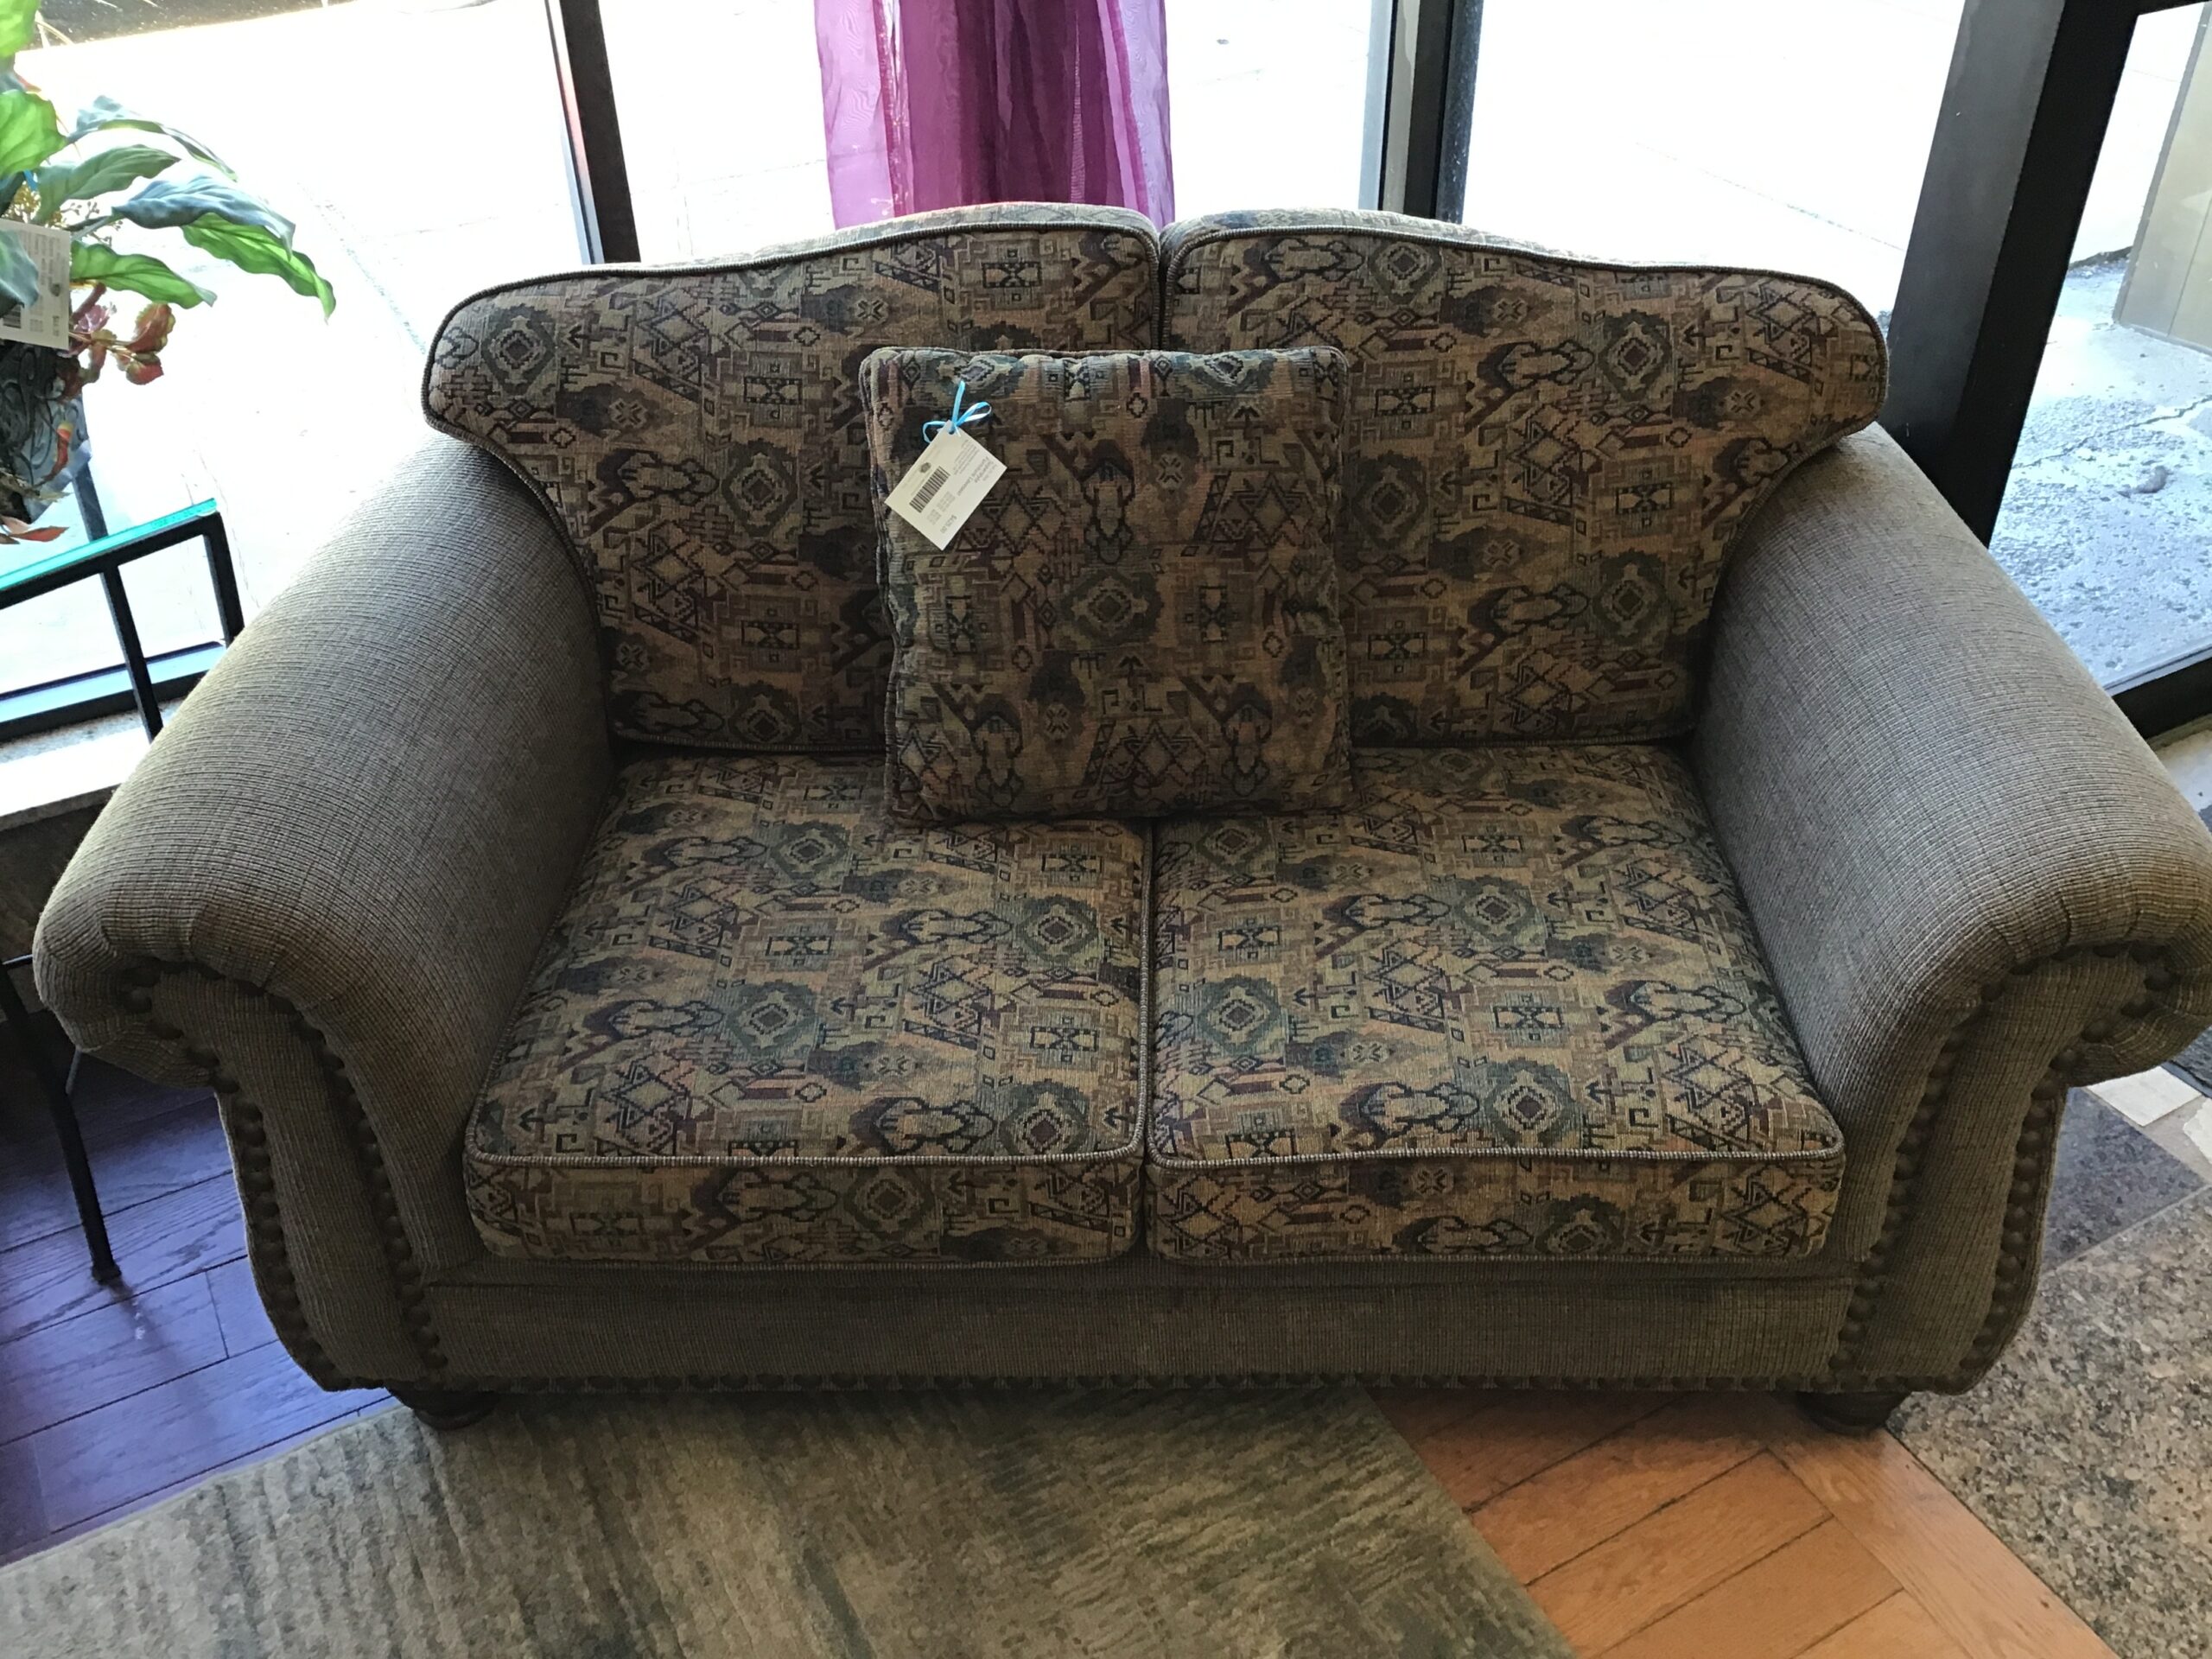 Superstyle Furniture Loveseat